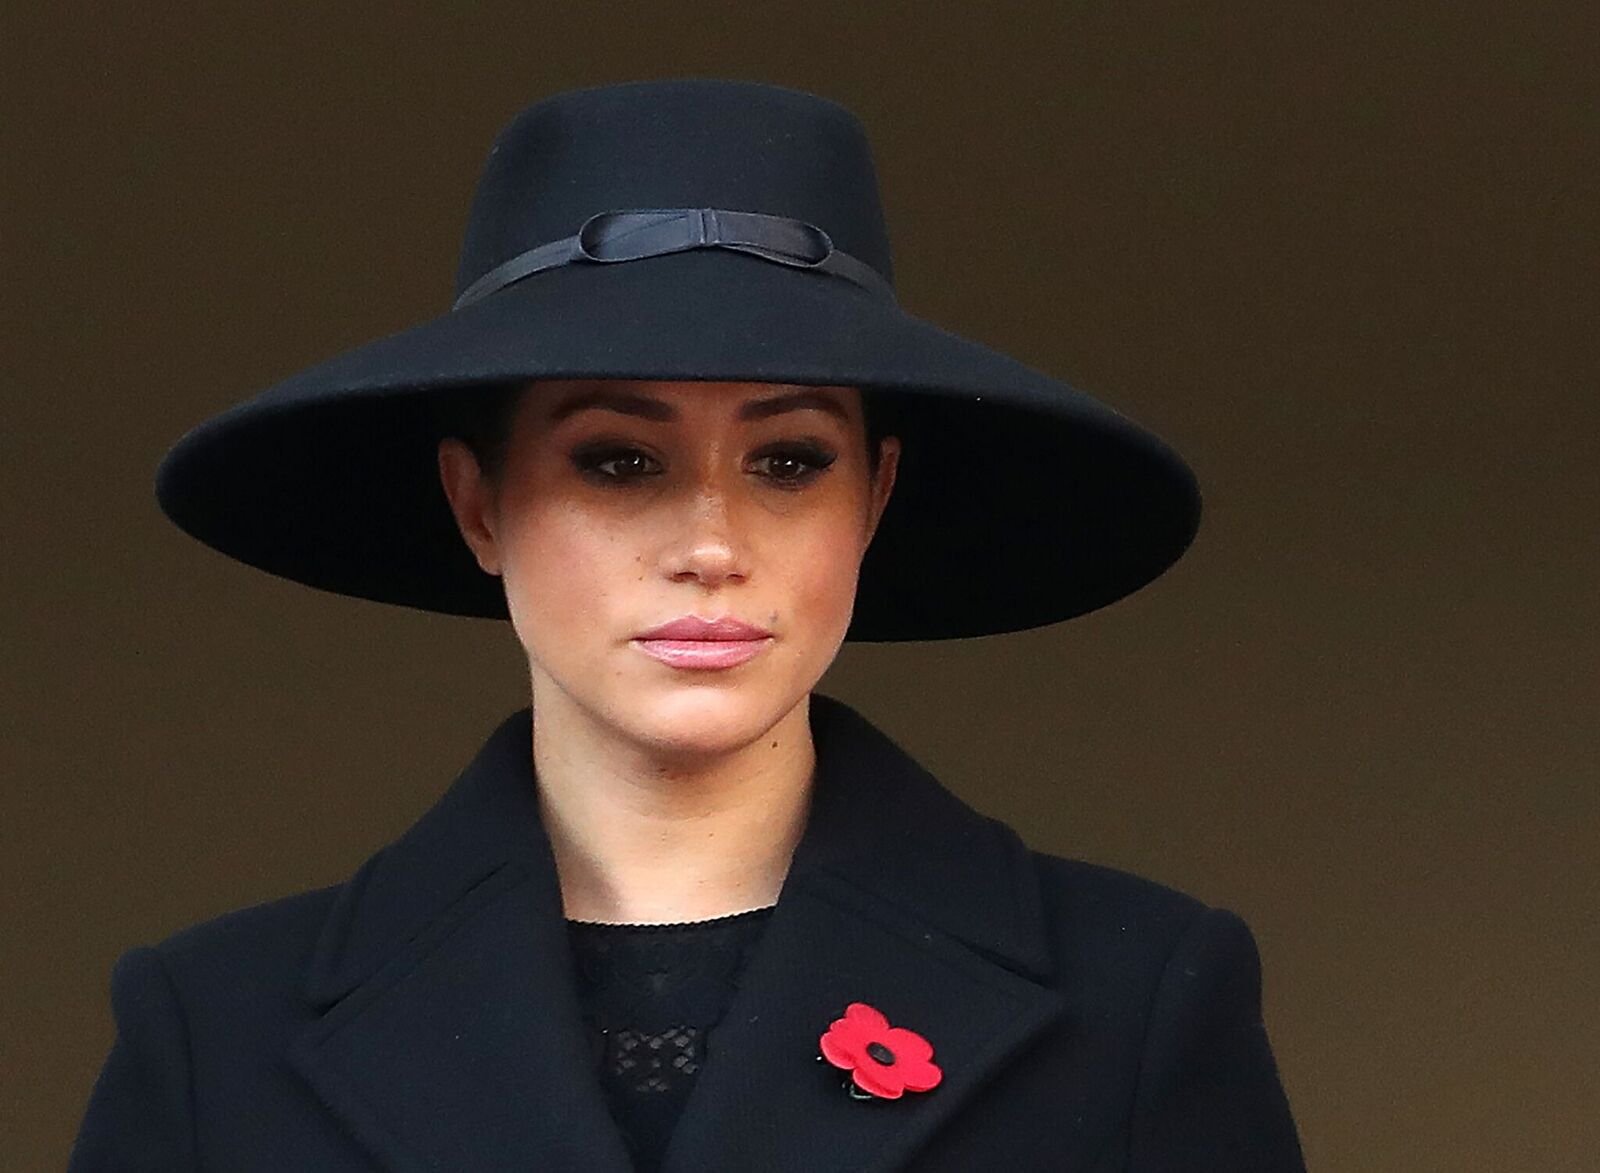 Duchess Meghan at the annual Remembrance Sunday memorial on November 10, 2019, in London, England | Photo: Chris Jackson/Getty Image